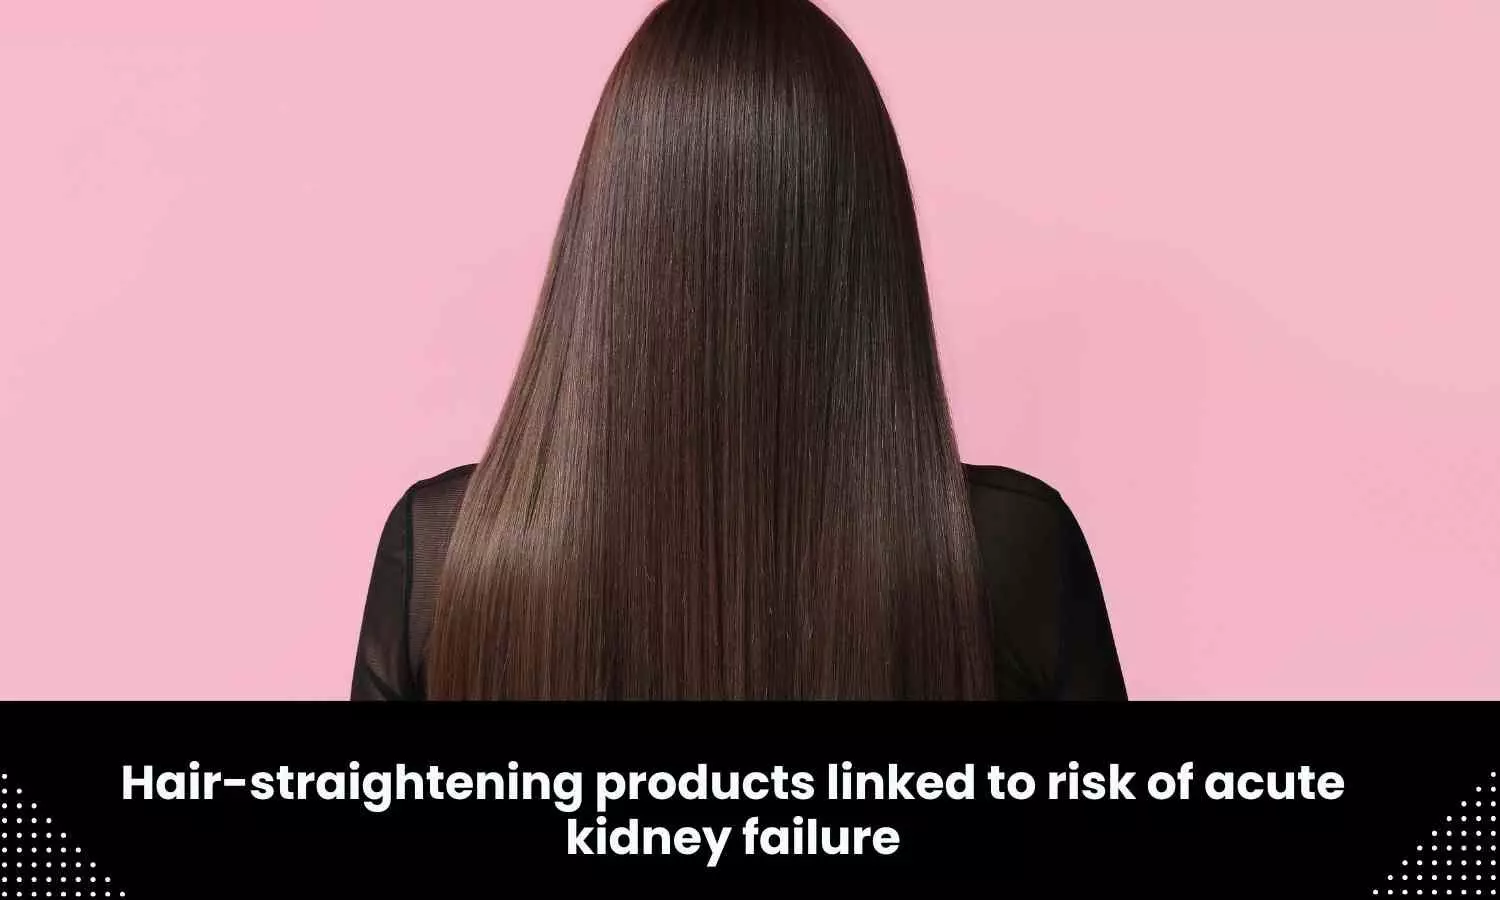 Hair-straightening products linked to acute kidney failure risk: Research